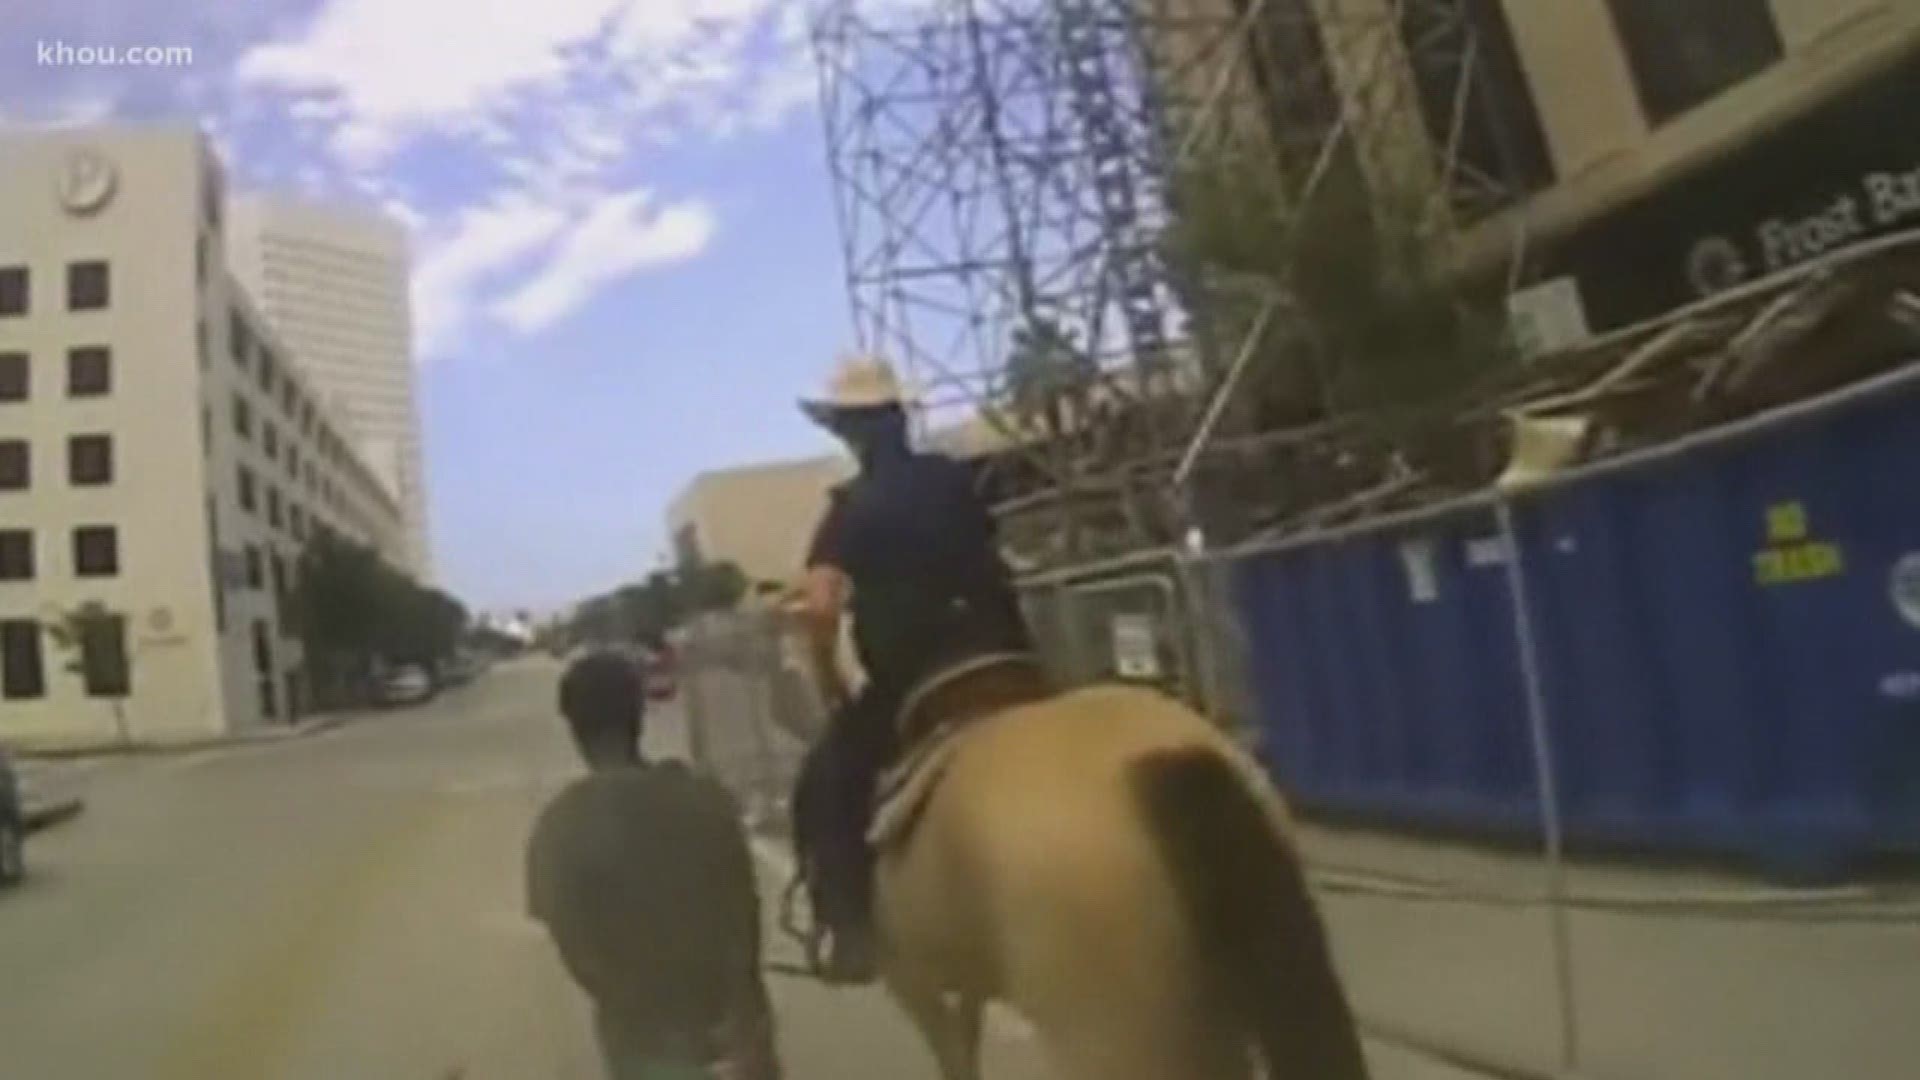 Galveston Police released body cam footage from the Aug. 3 arrest that sparked outrage after a man was seen being led by a rope between mounted patrol officers.